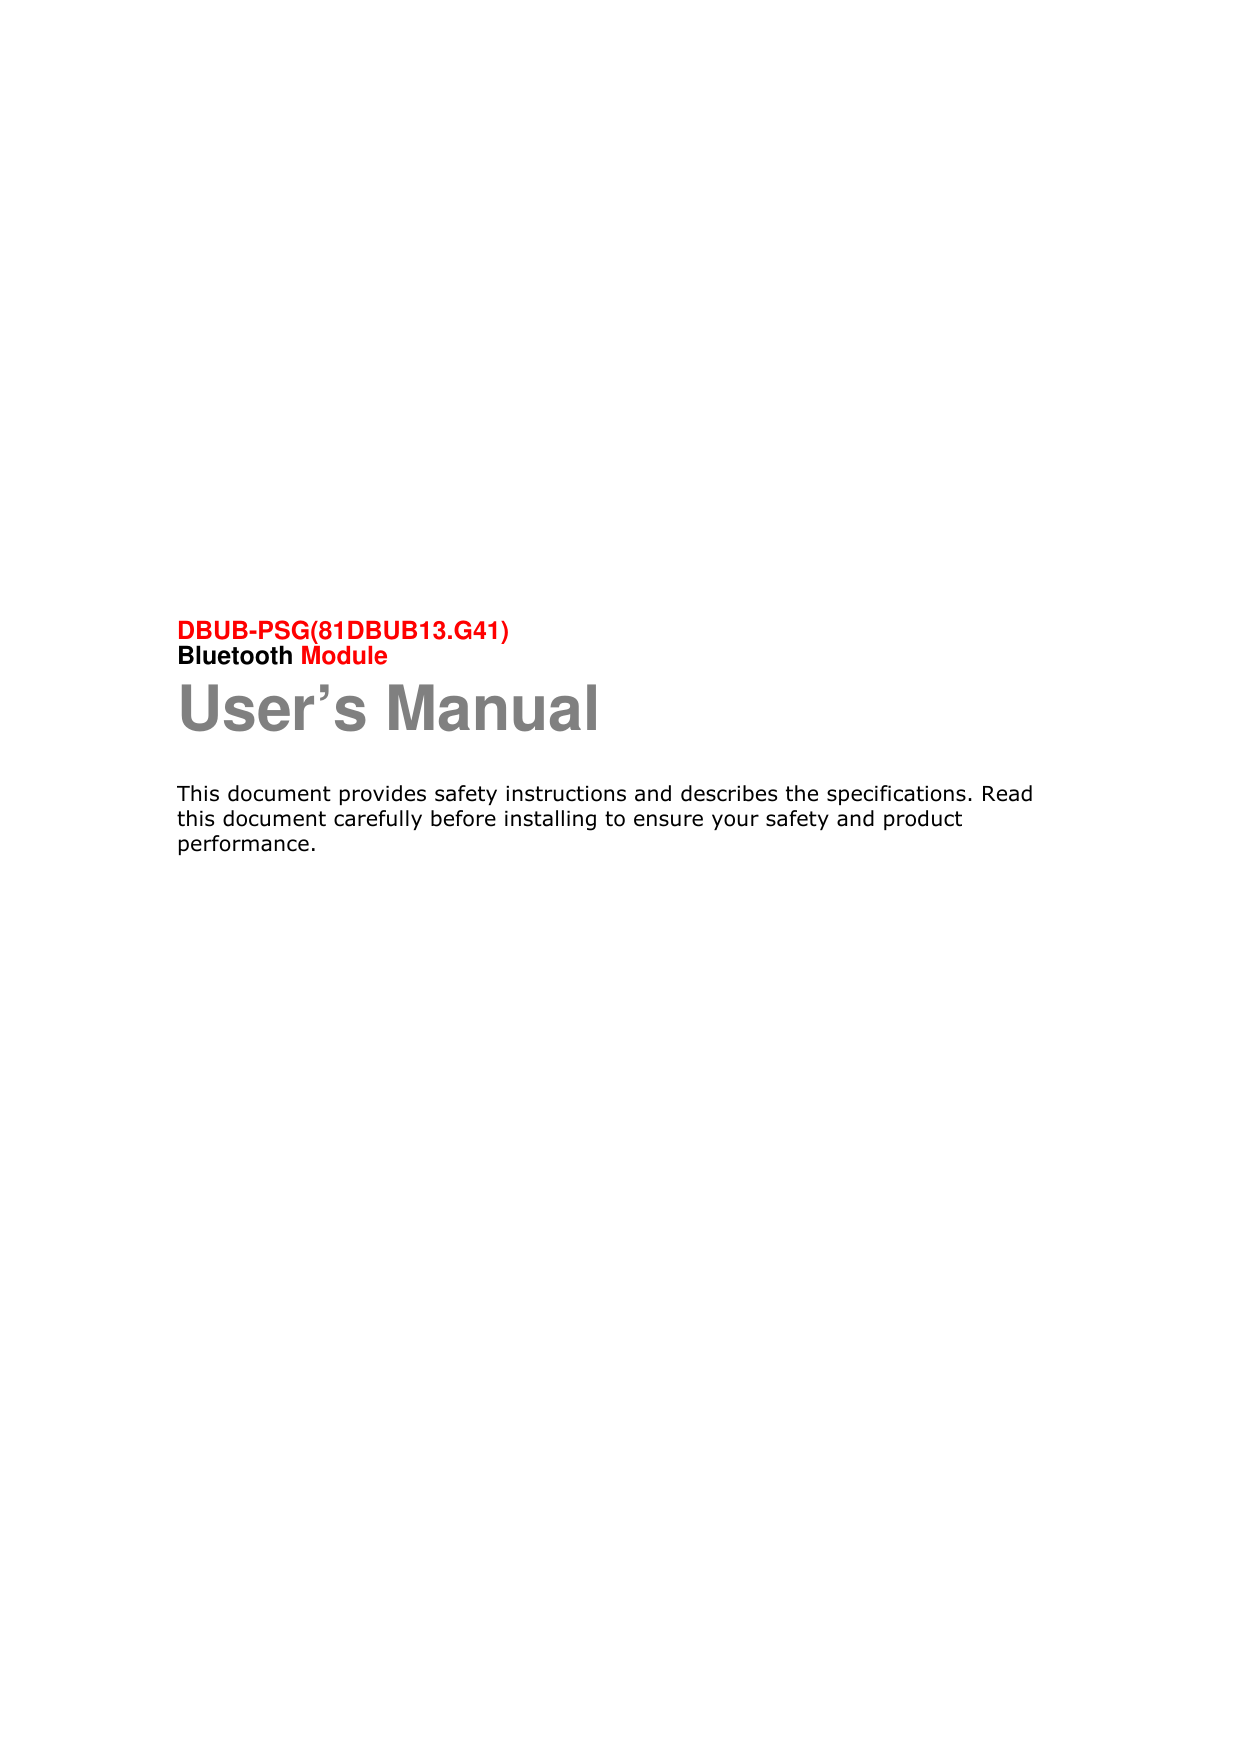            DBUB-PSG(81DBUB13.G41)   Bluetooth Module User’s Manual This document provides safety instructions and describes the specifications. Read this document carefully before installing to ensure your safety and product performance.    